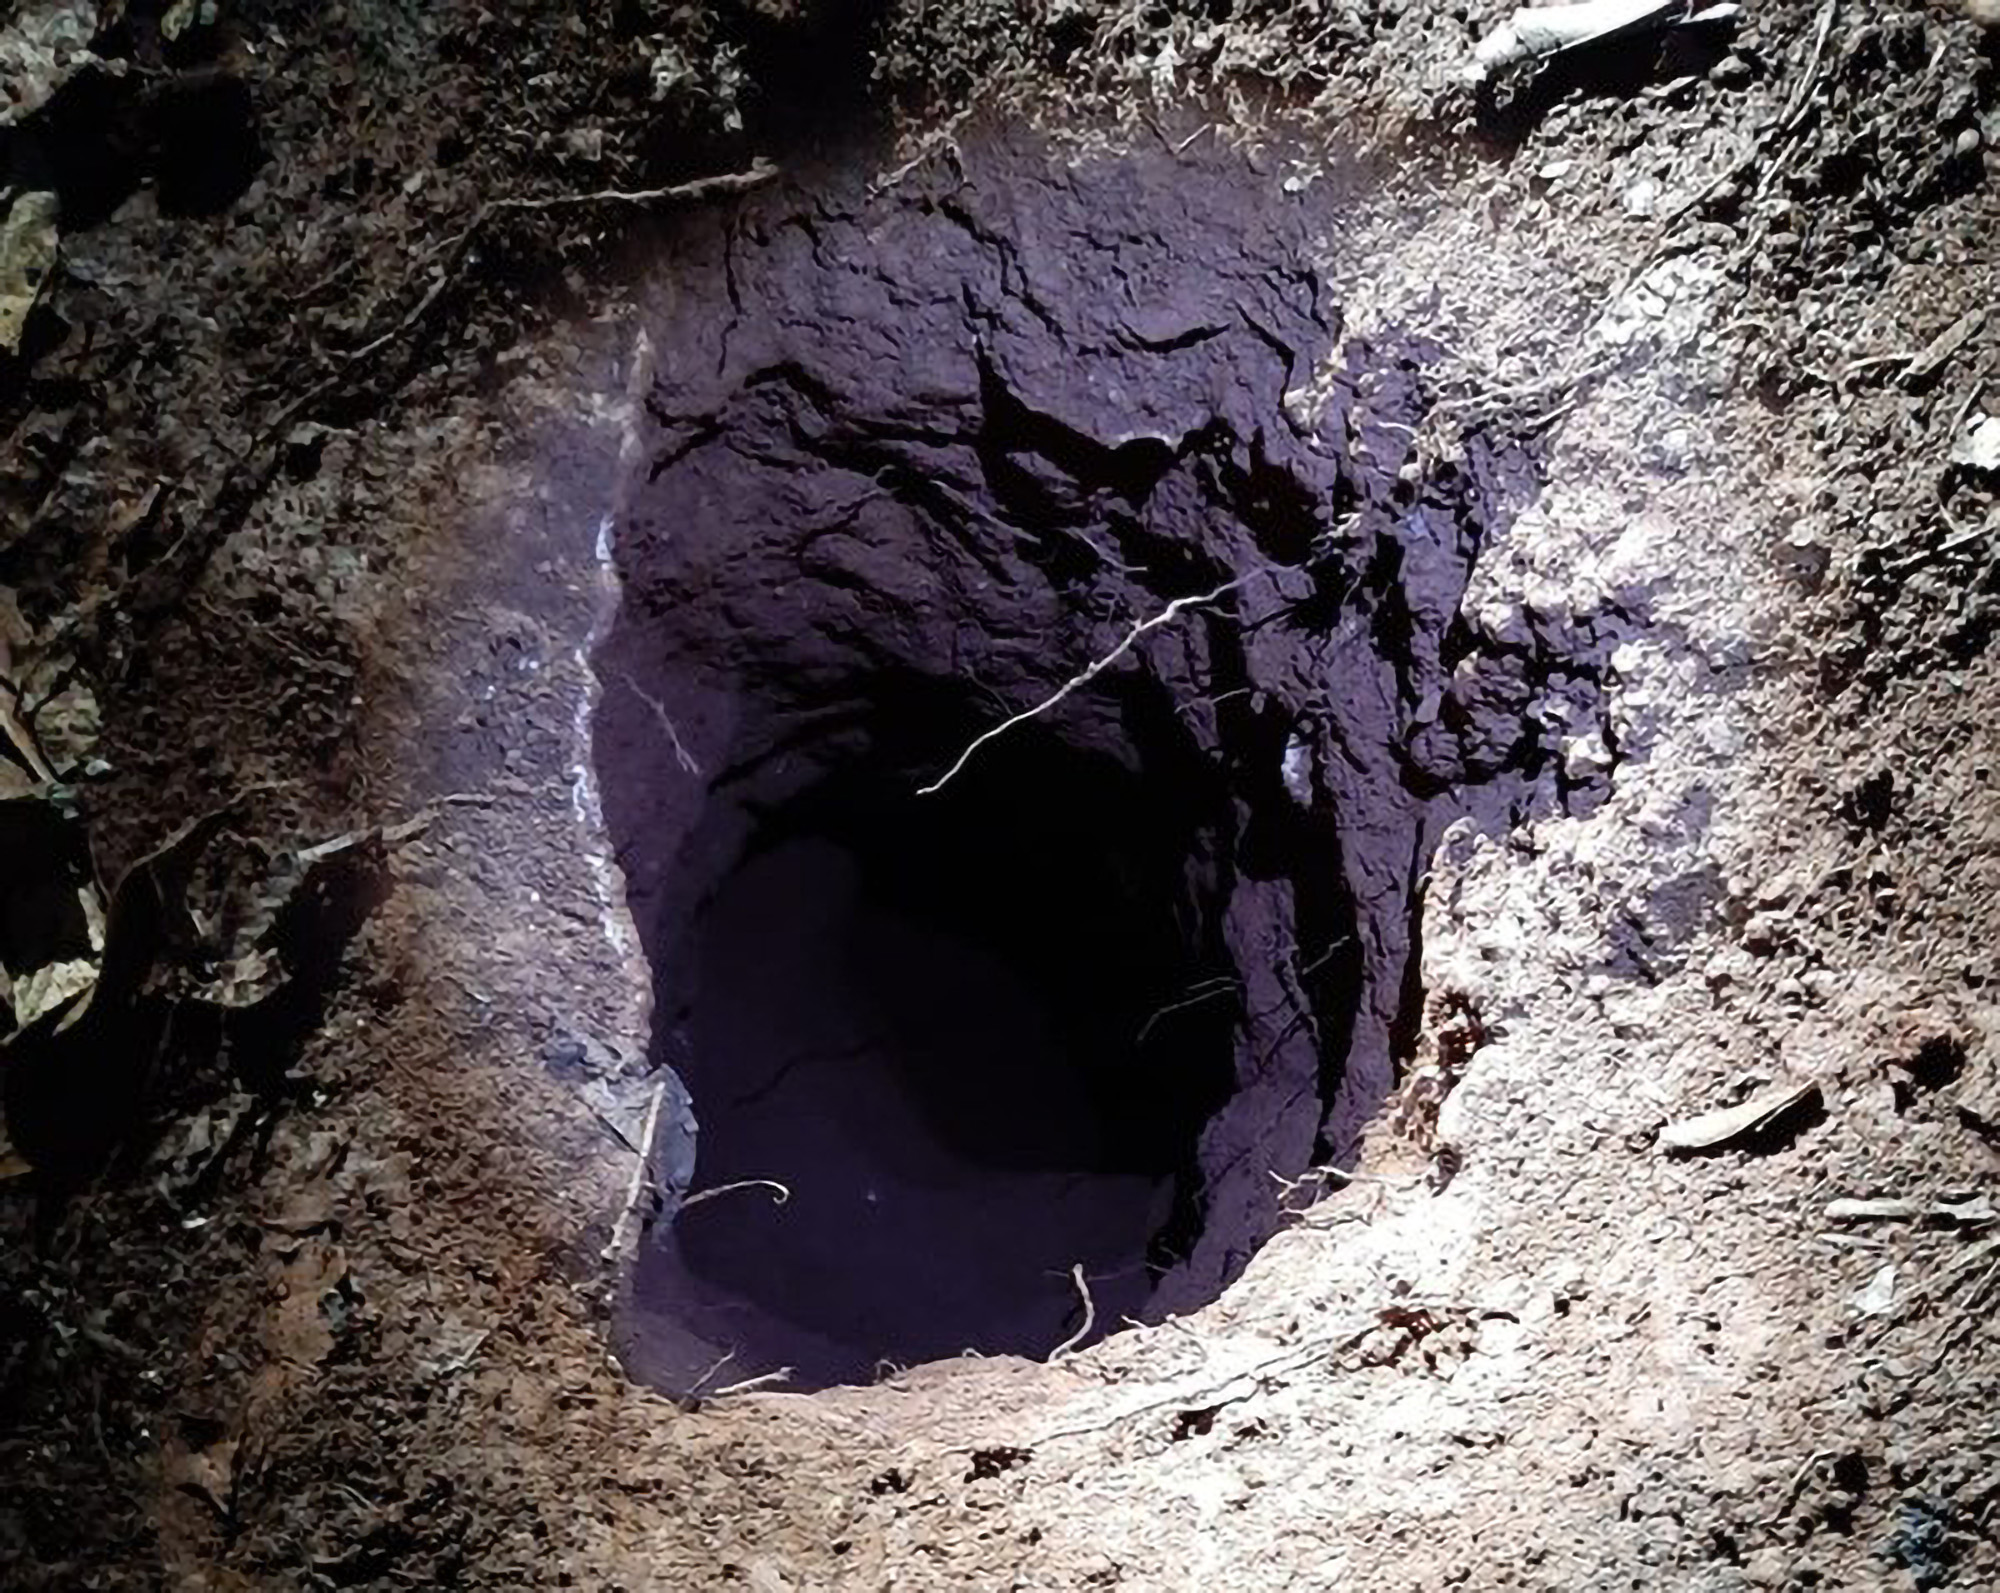 Read more about the article Lags With COVID-19 Dig 30m Tunnel And Escape From Jail